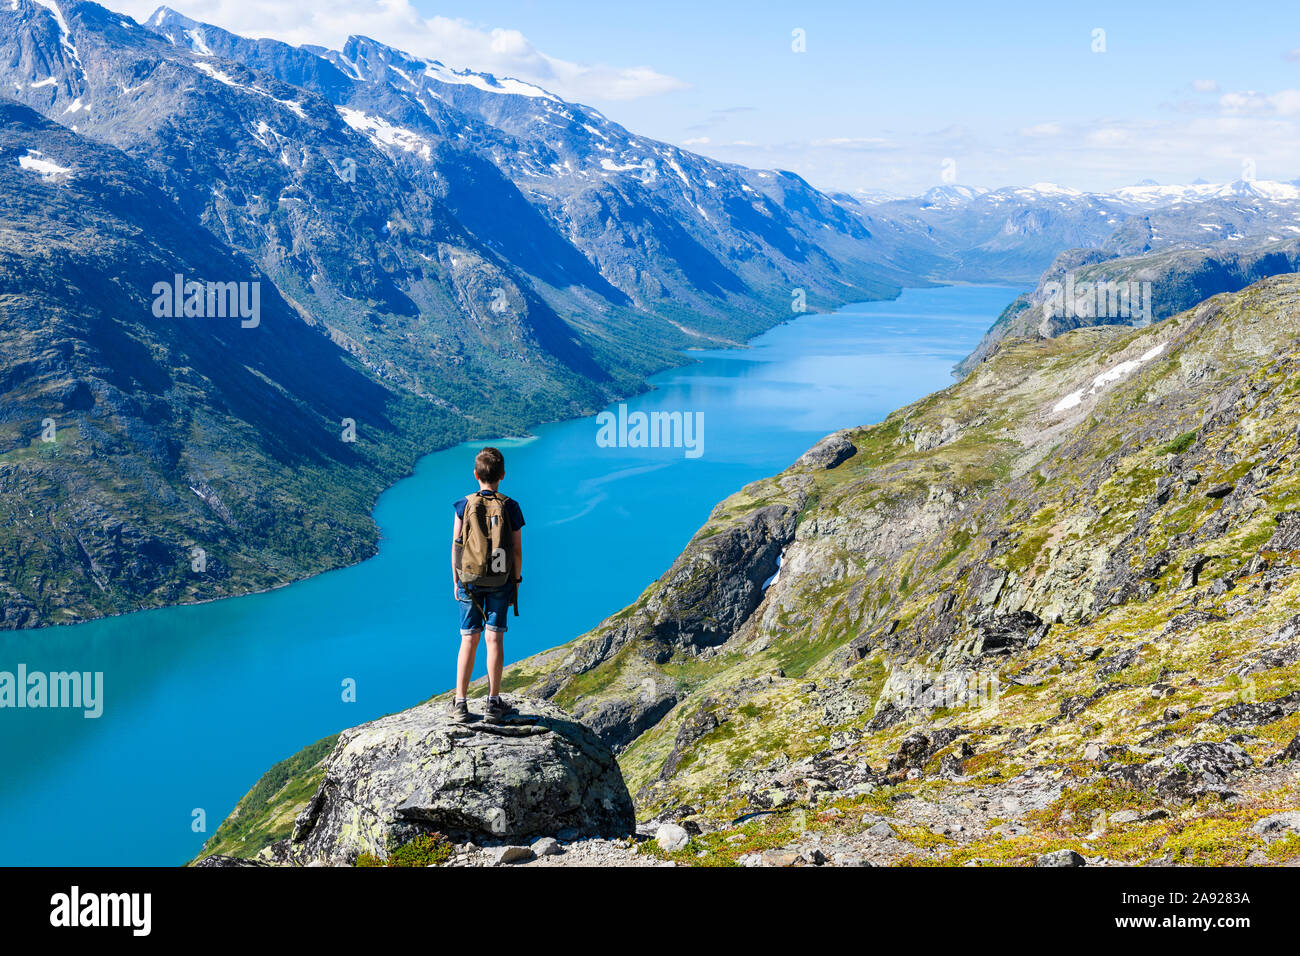 Hiker in mountains Stock Photo